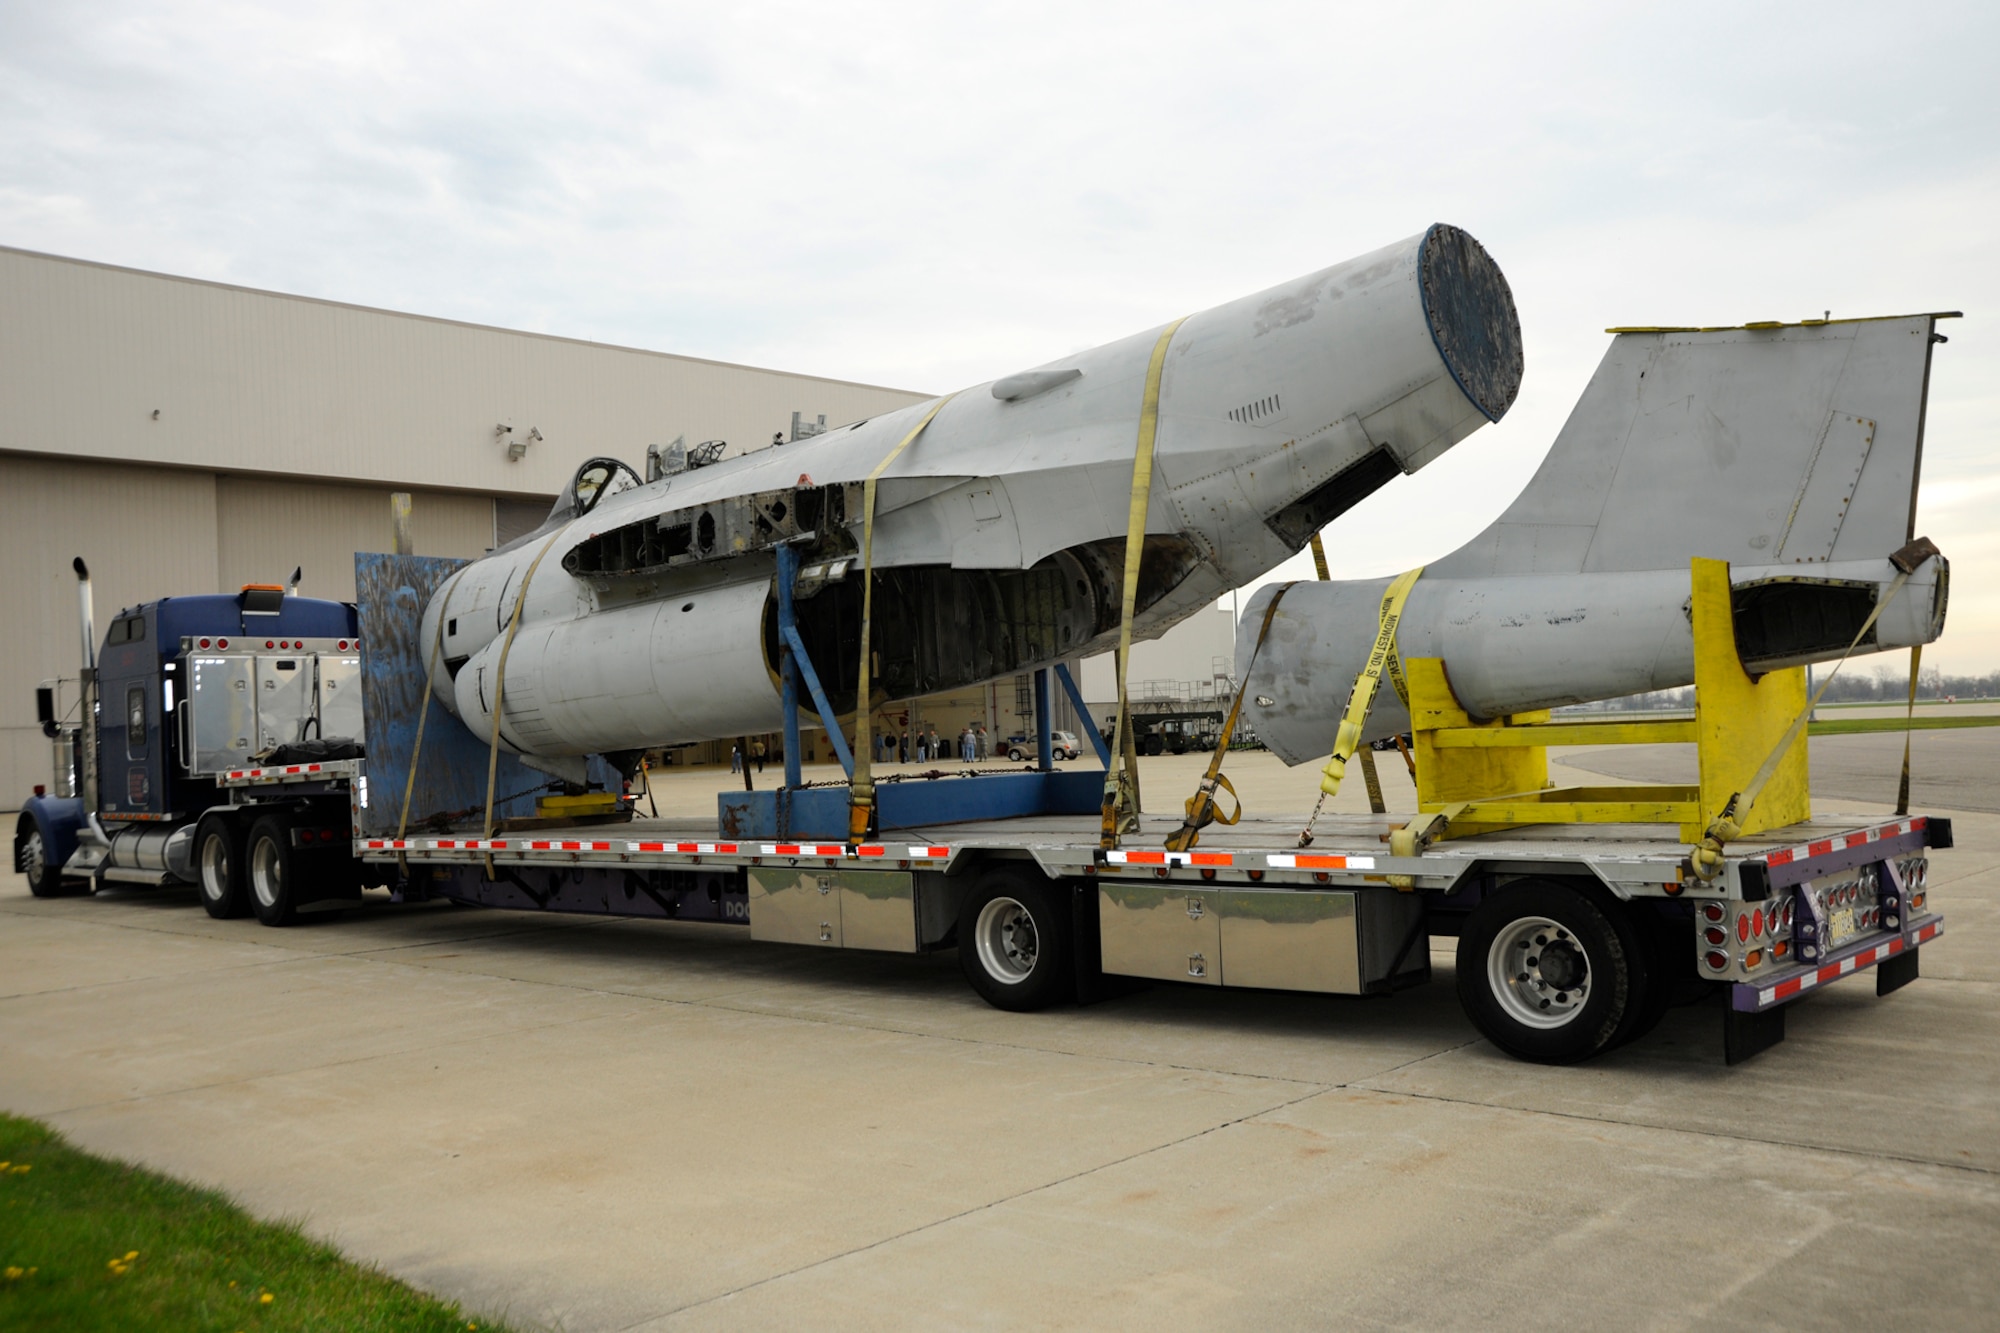 The fuselage and tail section of an F-89 Scorpion sit on a flatbed truck after being delivered to Selfridge Air National Guard Base, Mich., April 16, 2012. Once finished, volunteers at the Selfridge Military Air Museum believe they will have the only restored F-89 “C” model on display in the country, possibly the world. (U.S. Air Force photo by SSgt. Rachel Barton)